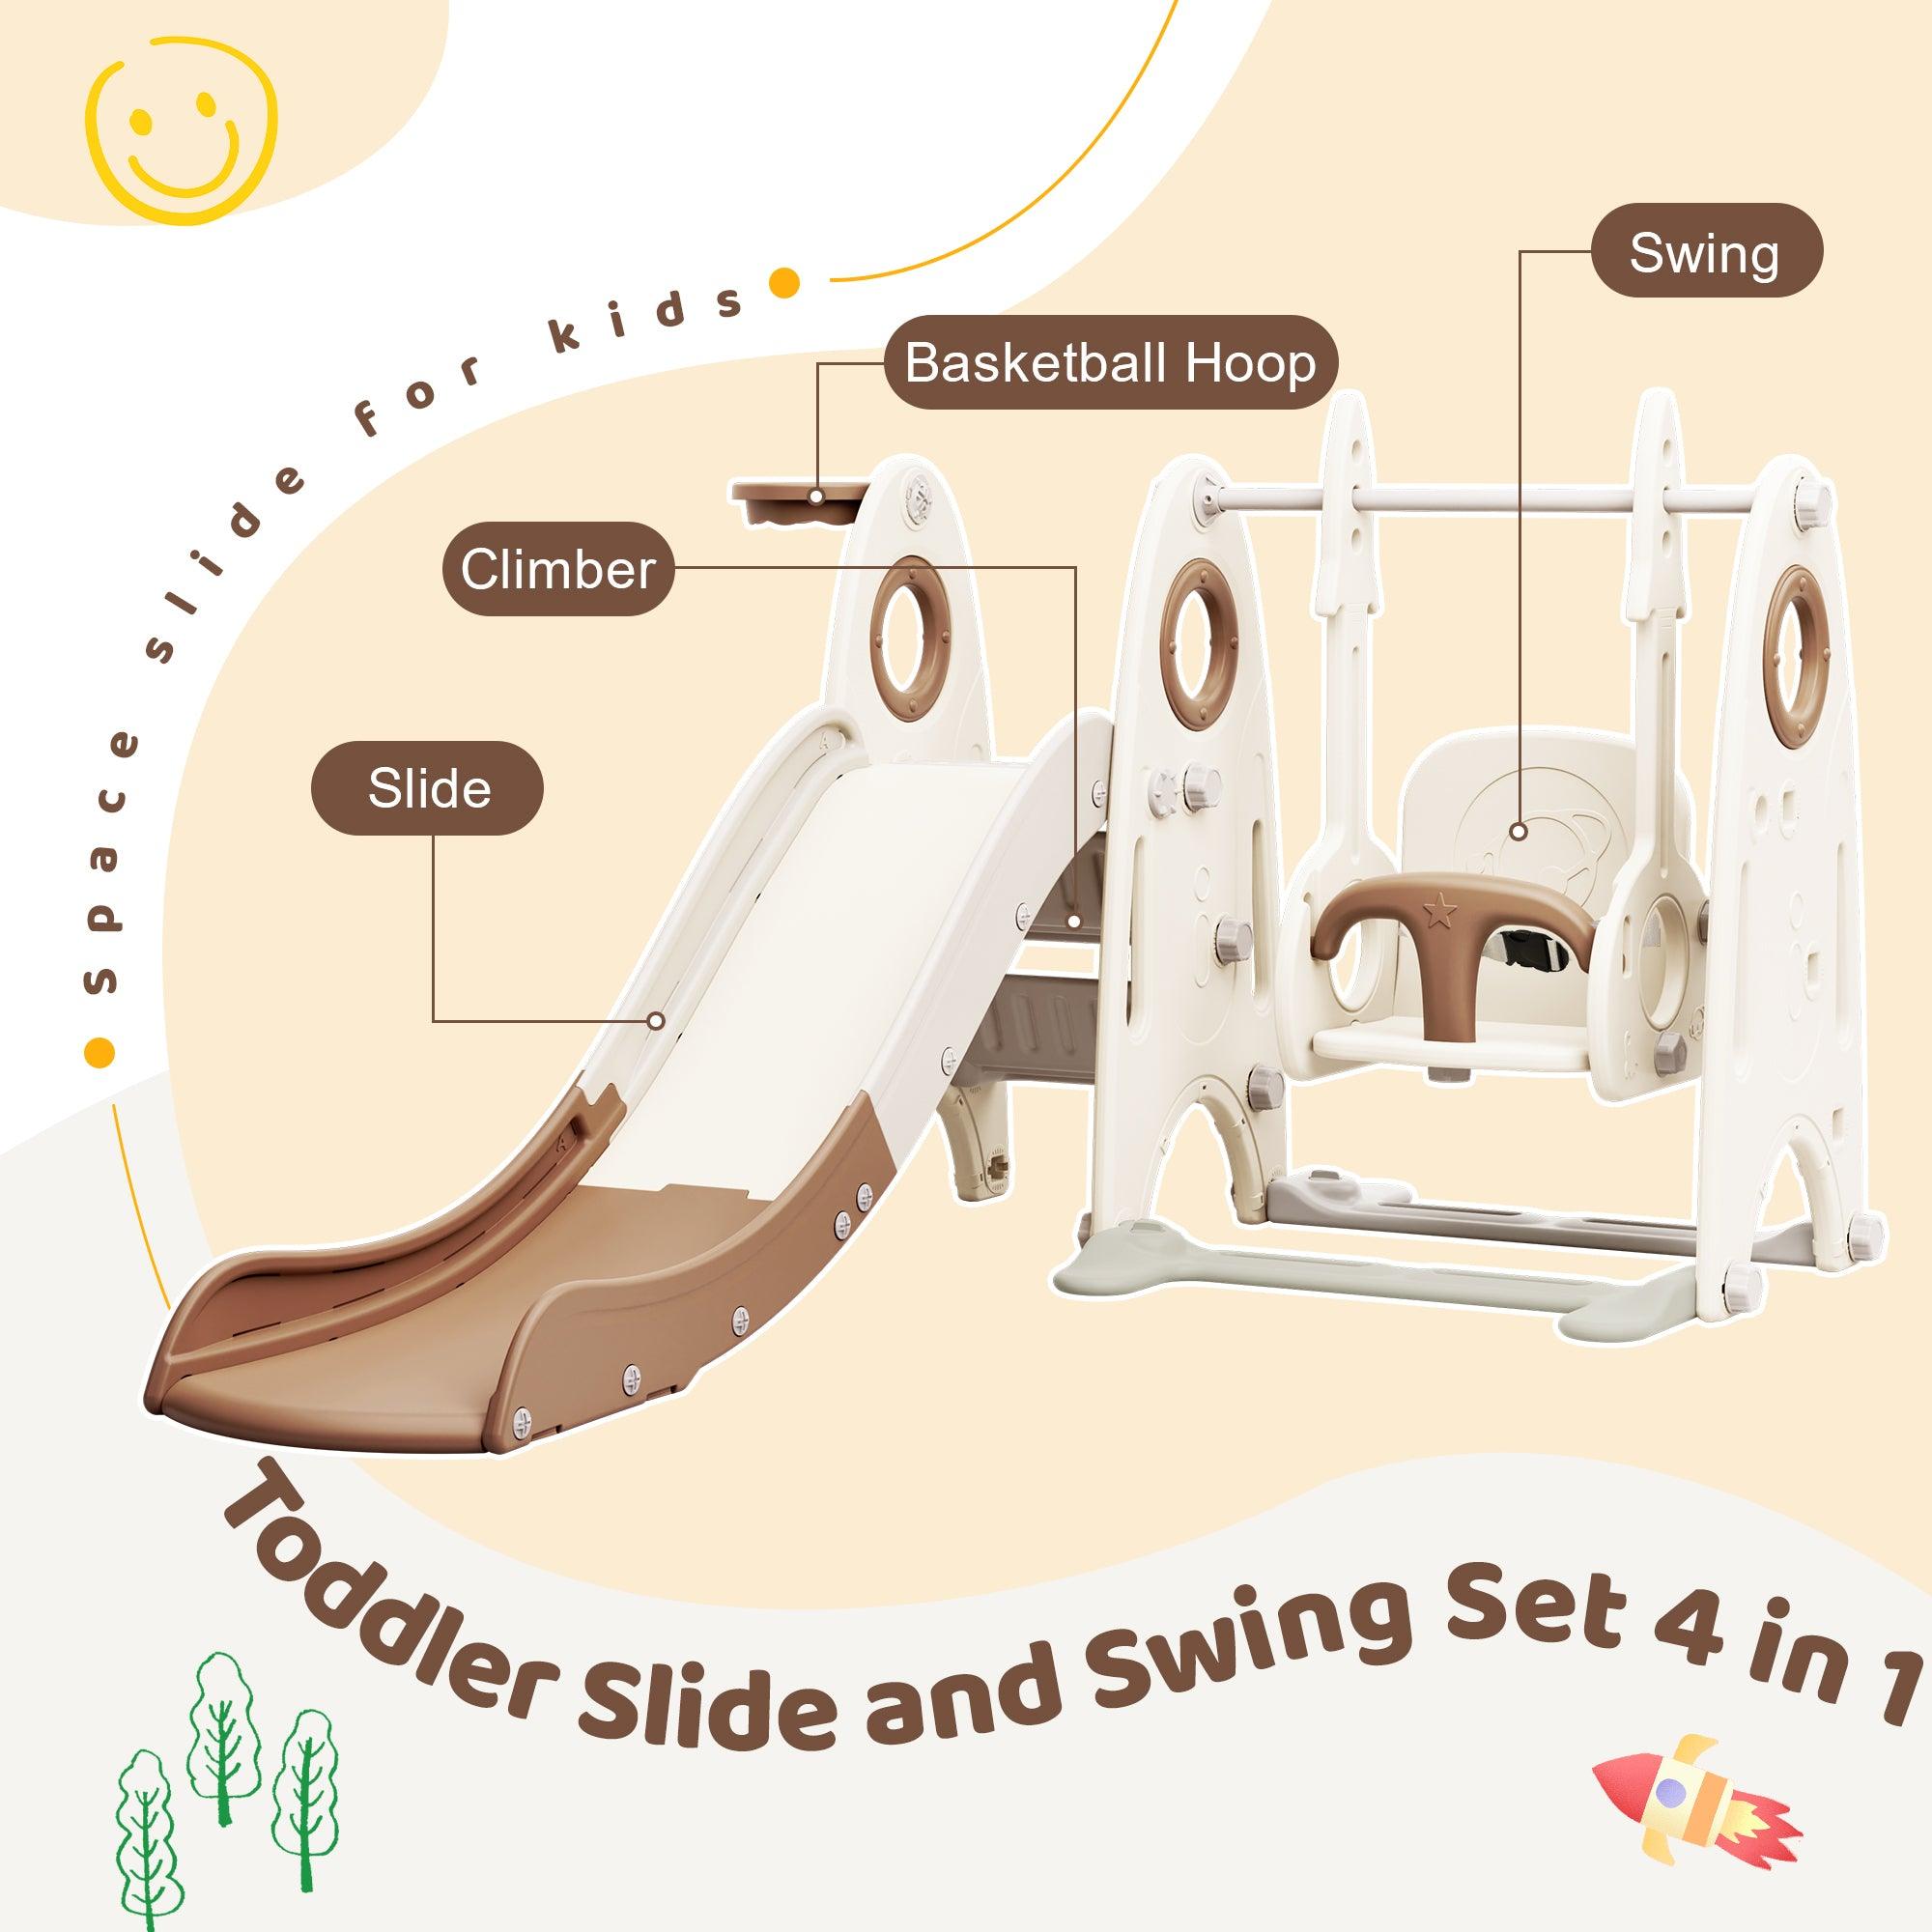 🆓🚛 4 in 1 Toddler Slide & Swing Set, Kids Playground Climber Slide Playset With Basketball Hoop for Babies, Coffee